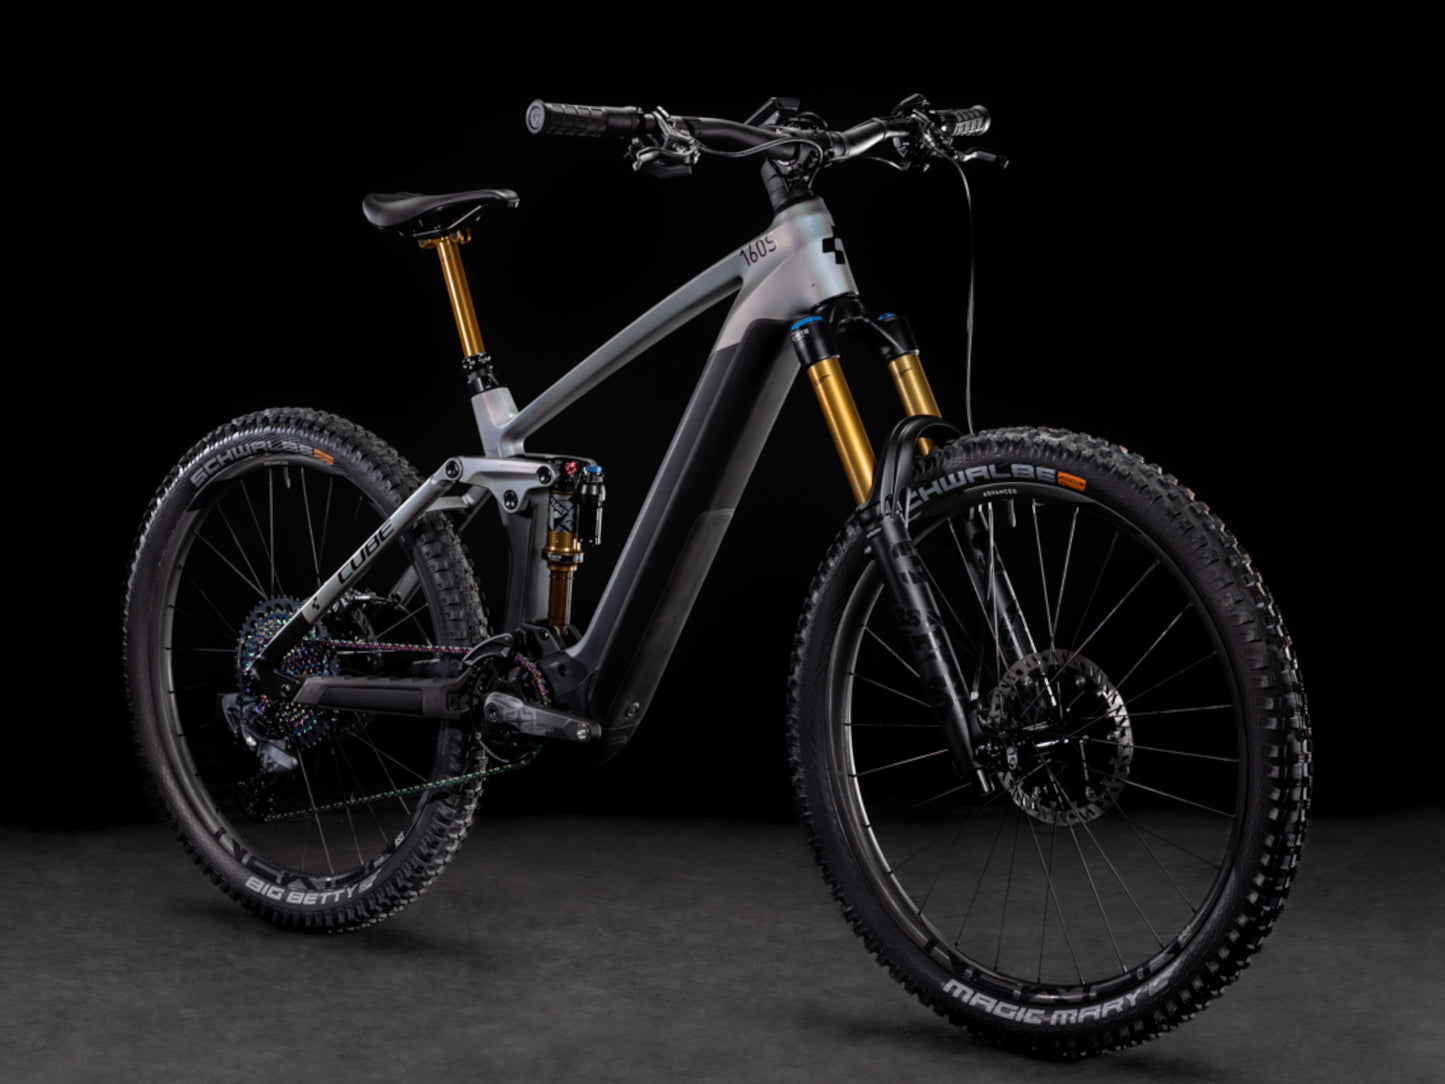 Cube Stereo Hybrid 160 HPC SLT 750 eMTB full Suspension prizmsilver n carbon front right side profile on Fly Rides.jpg